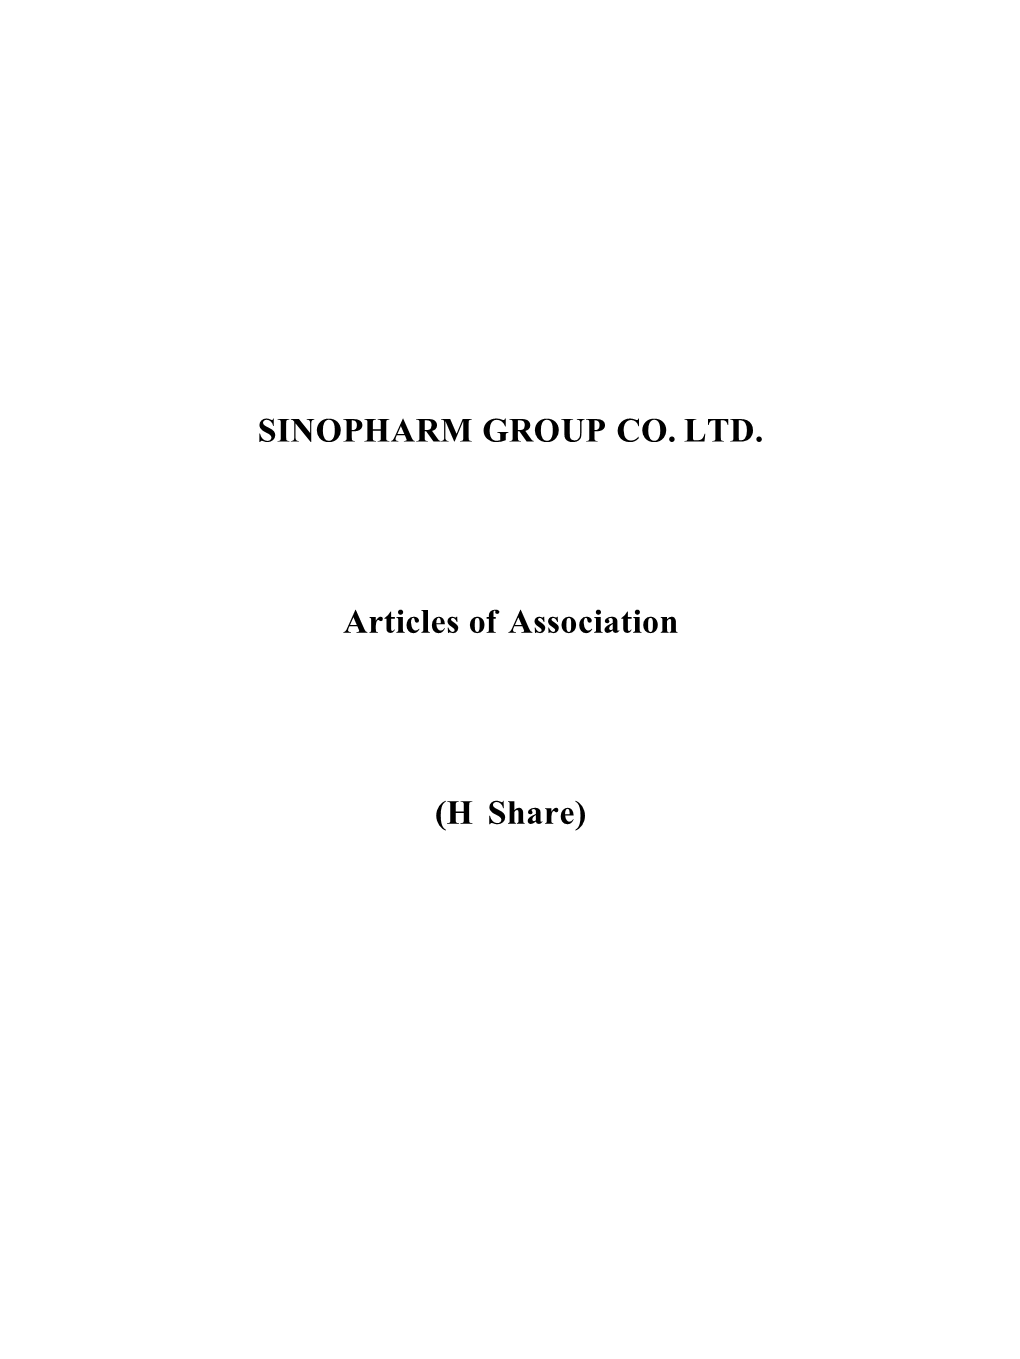 SINOPHARM GROUP CO. LTD. Articles of Association (H Share)